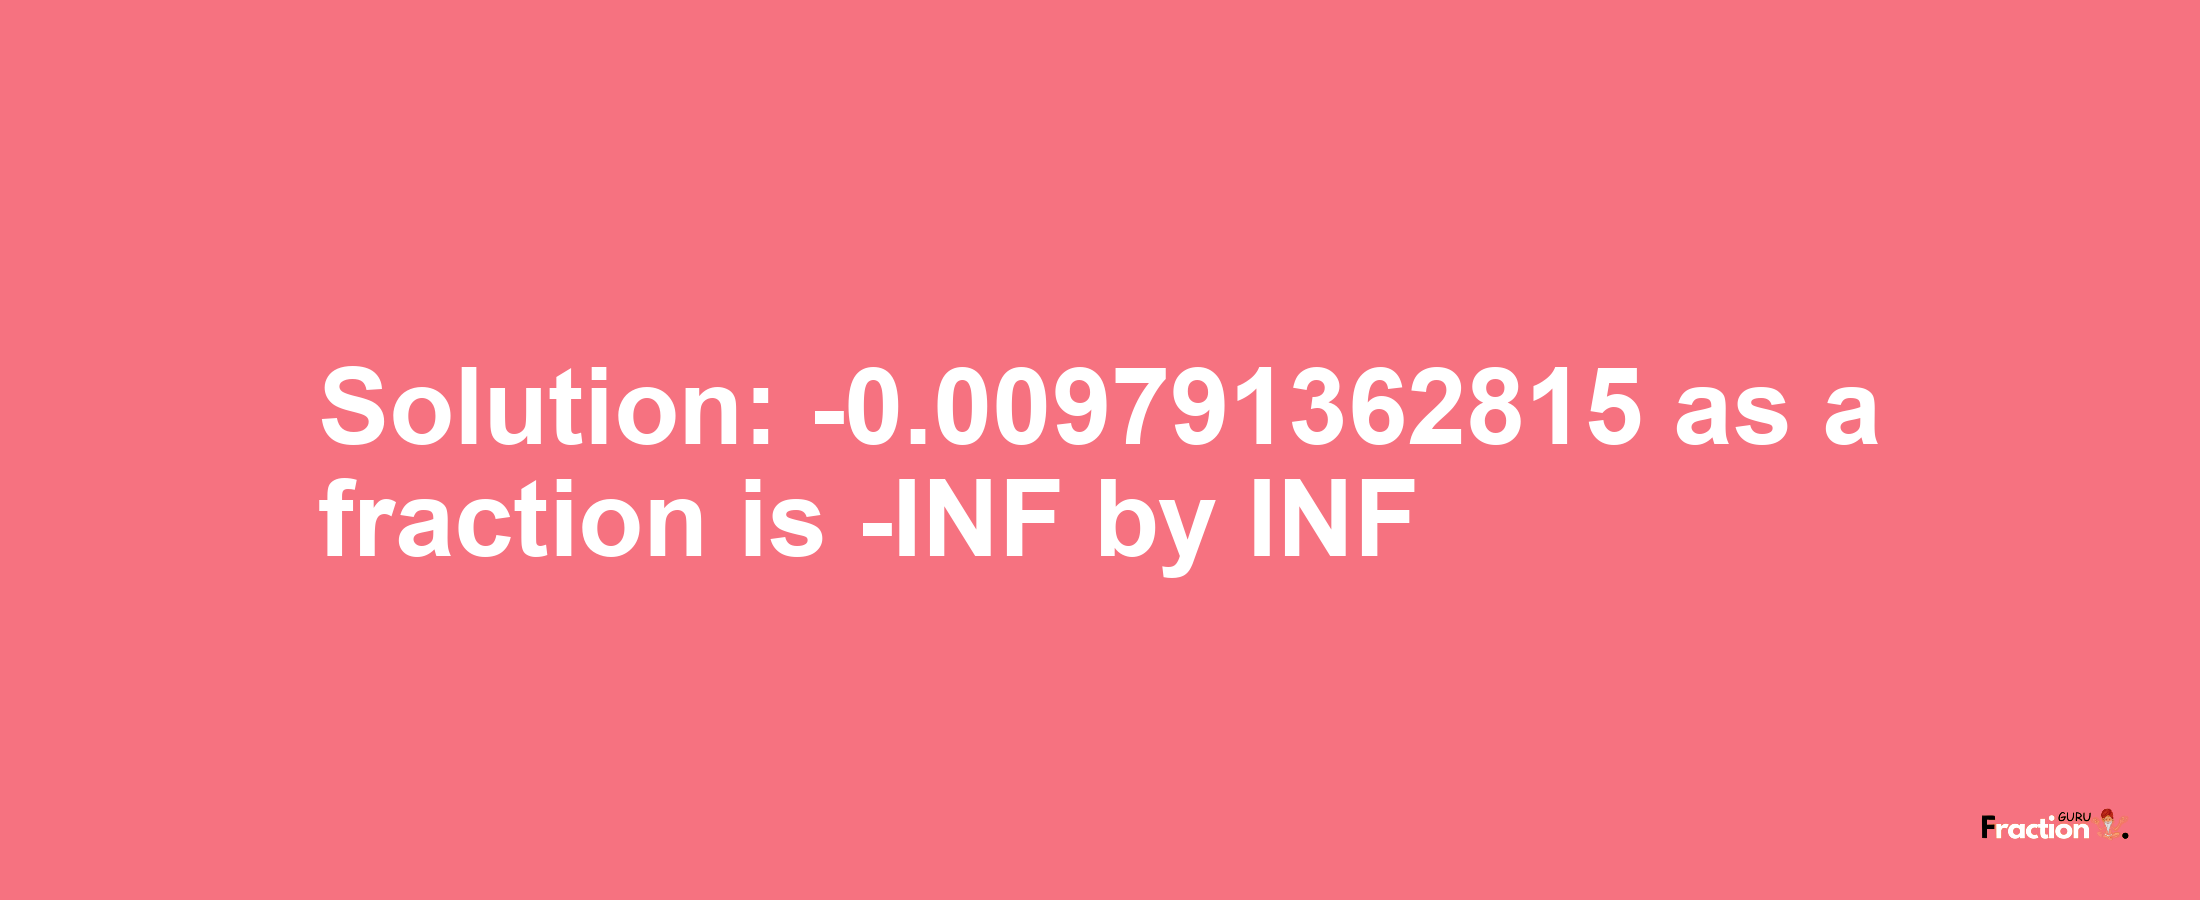 Solution:-0.009791362815 as a fraction is -INF/INF